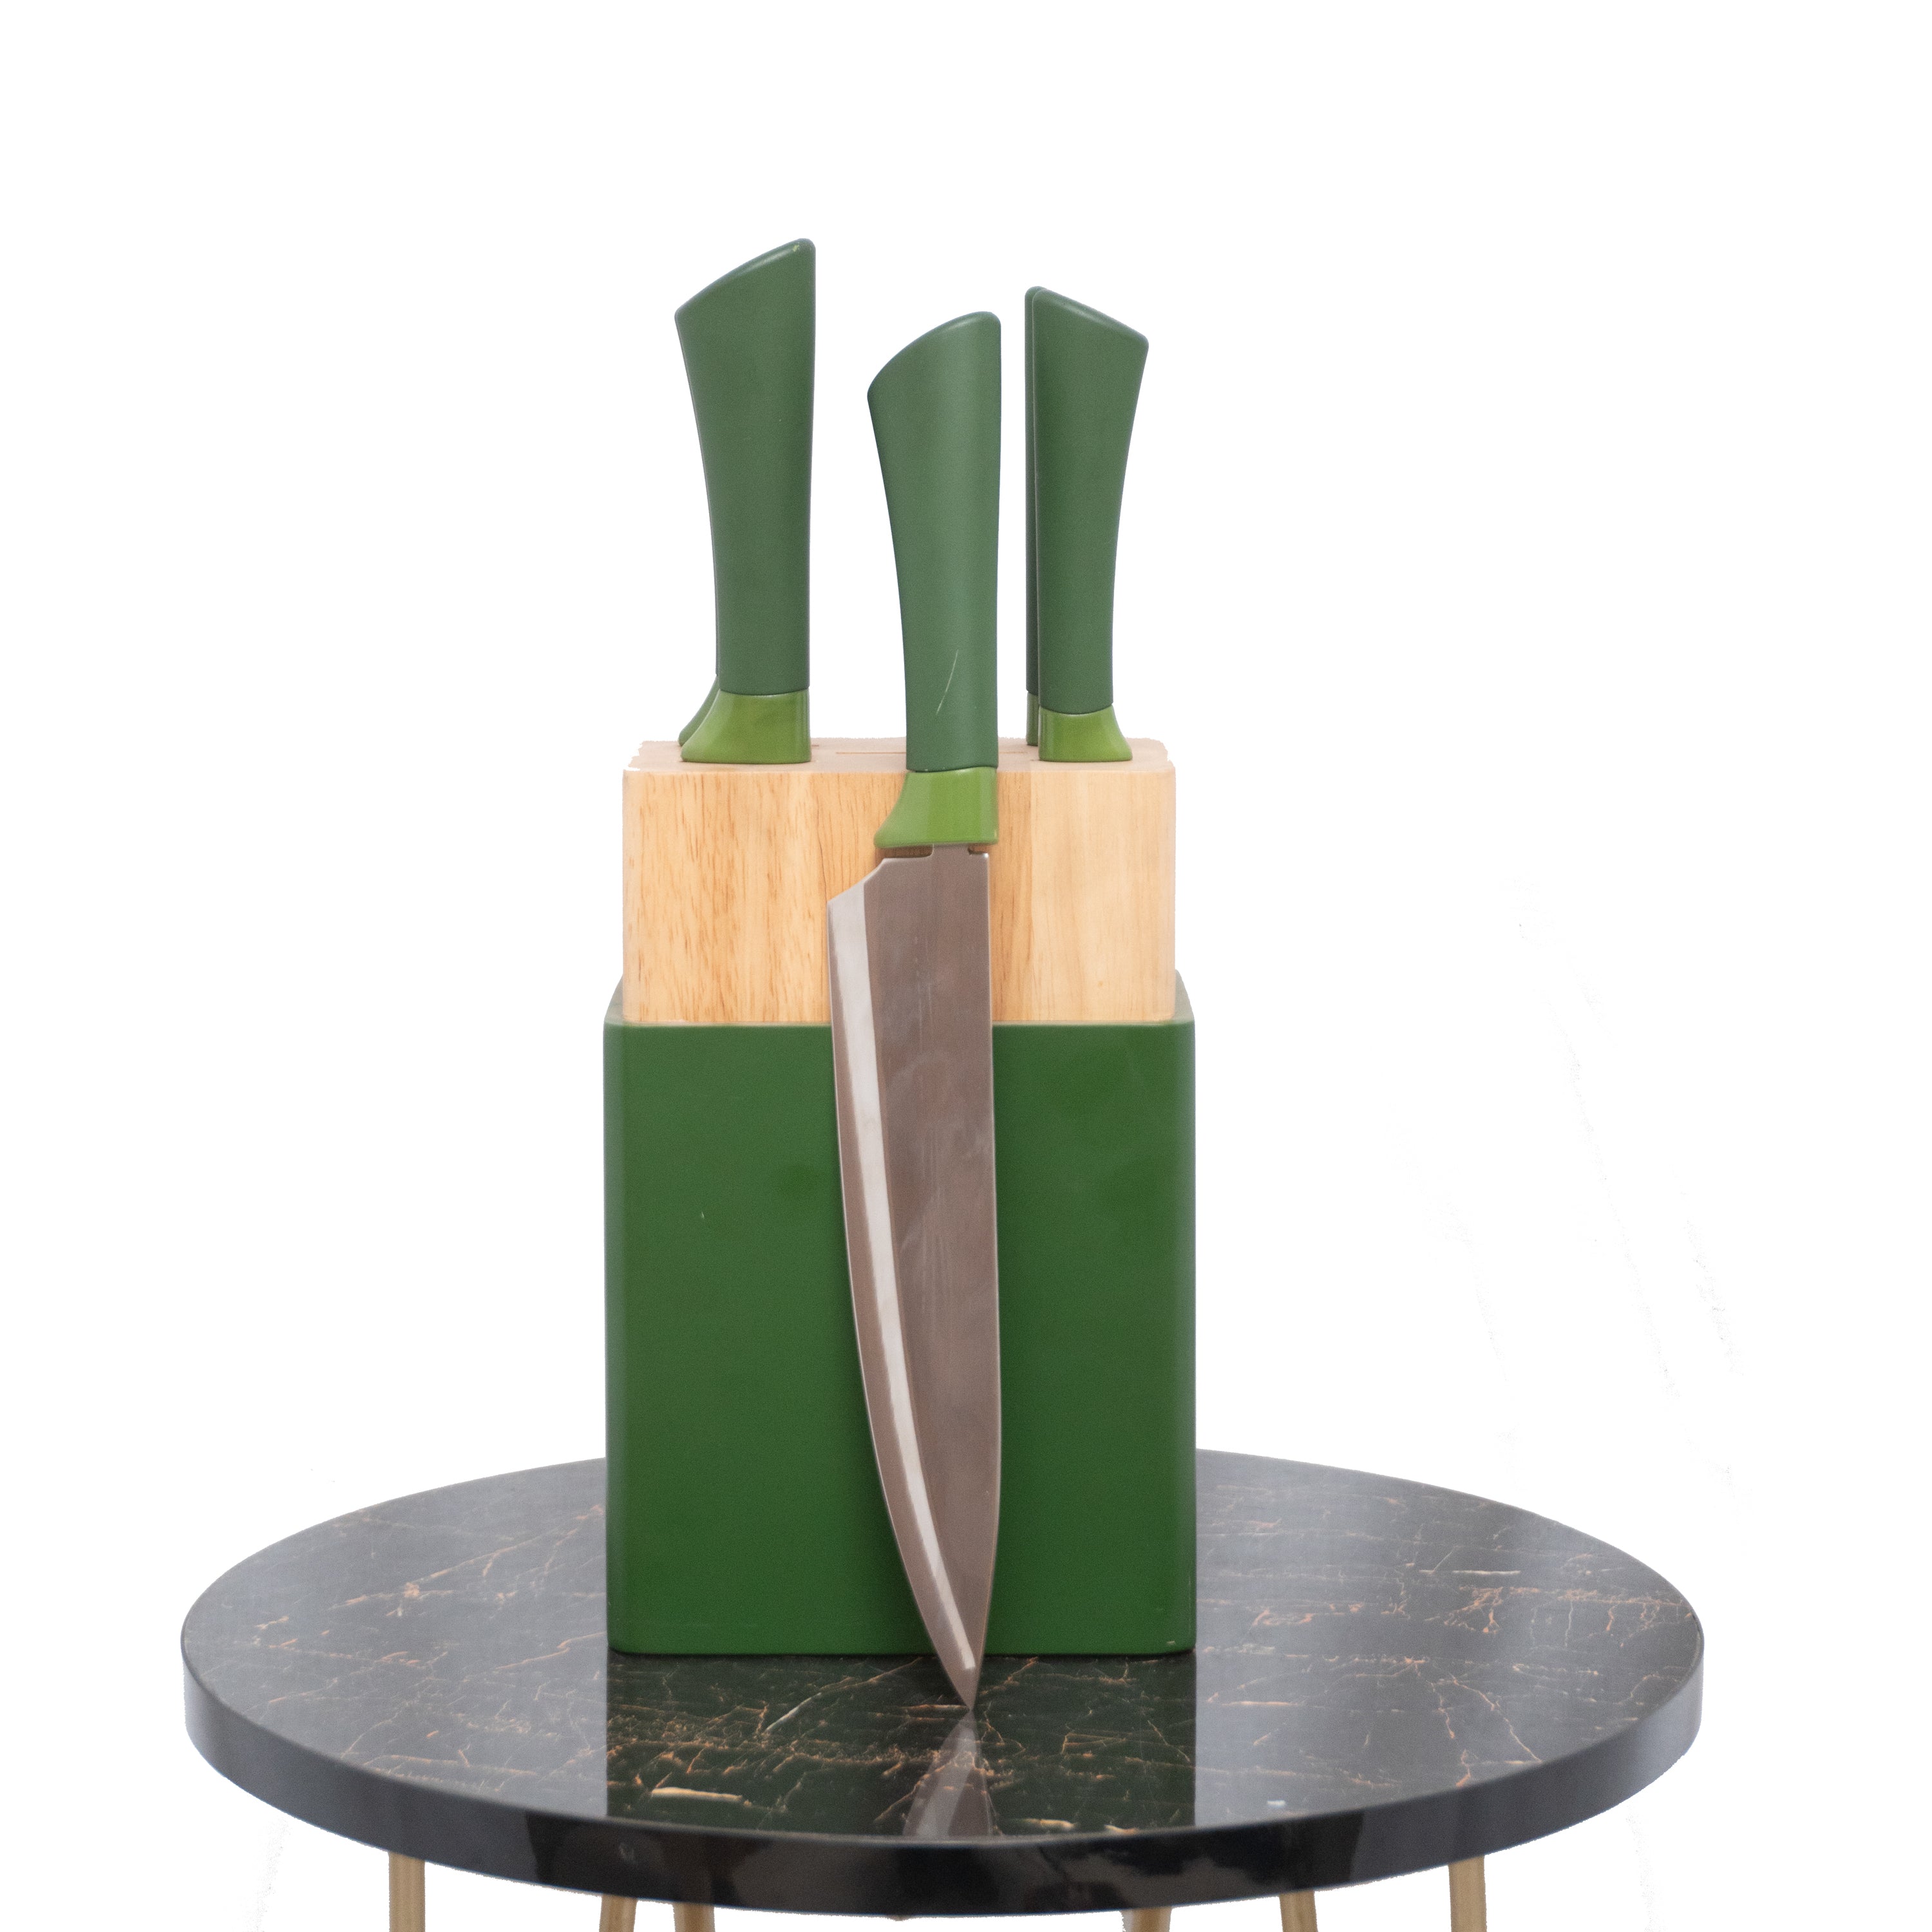 Knife Set with Wooden Stand - Essential Culinary Knives and Stylish Storage